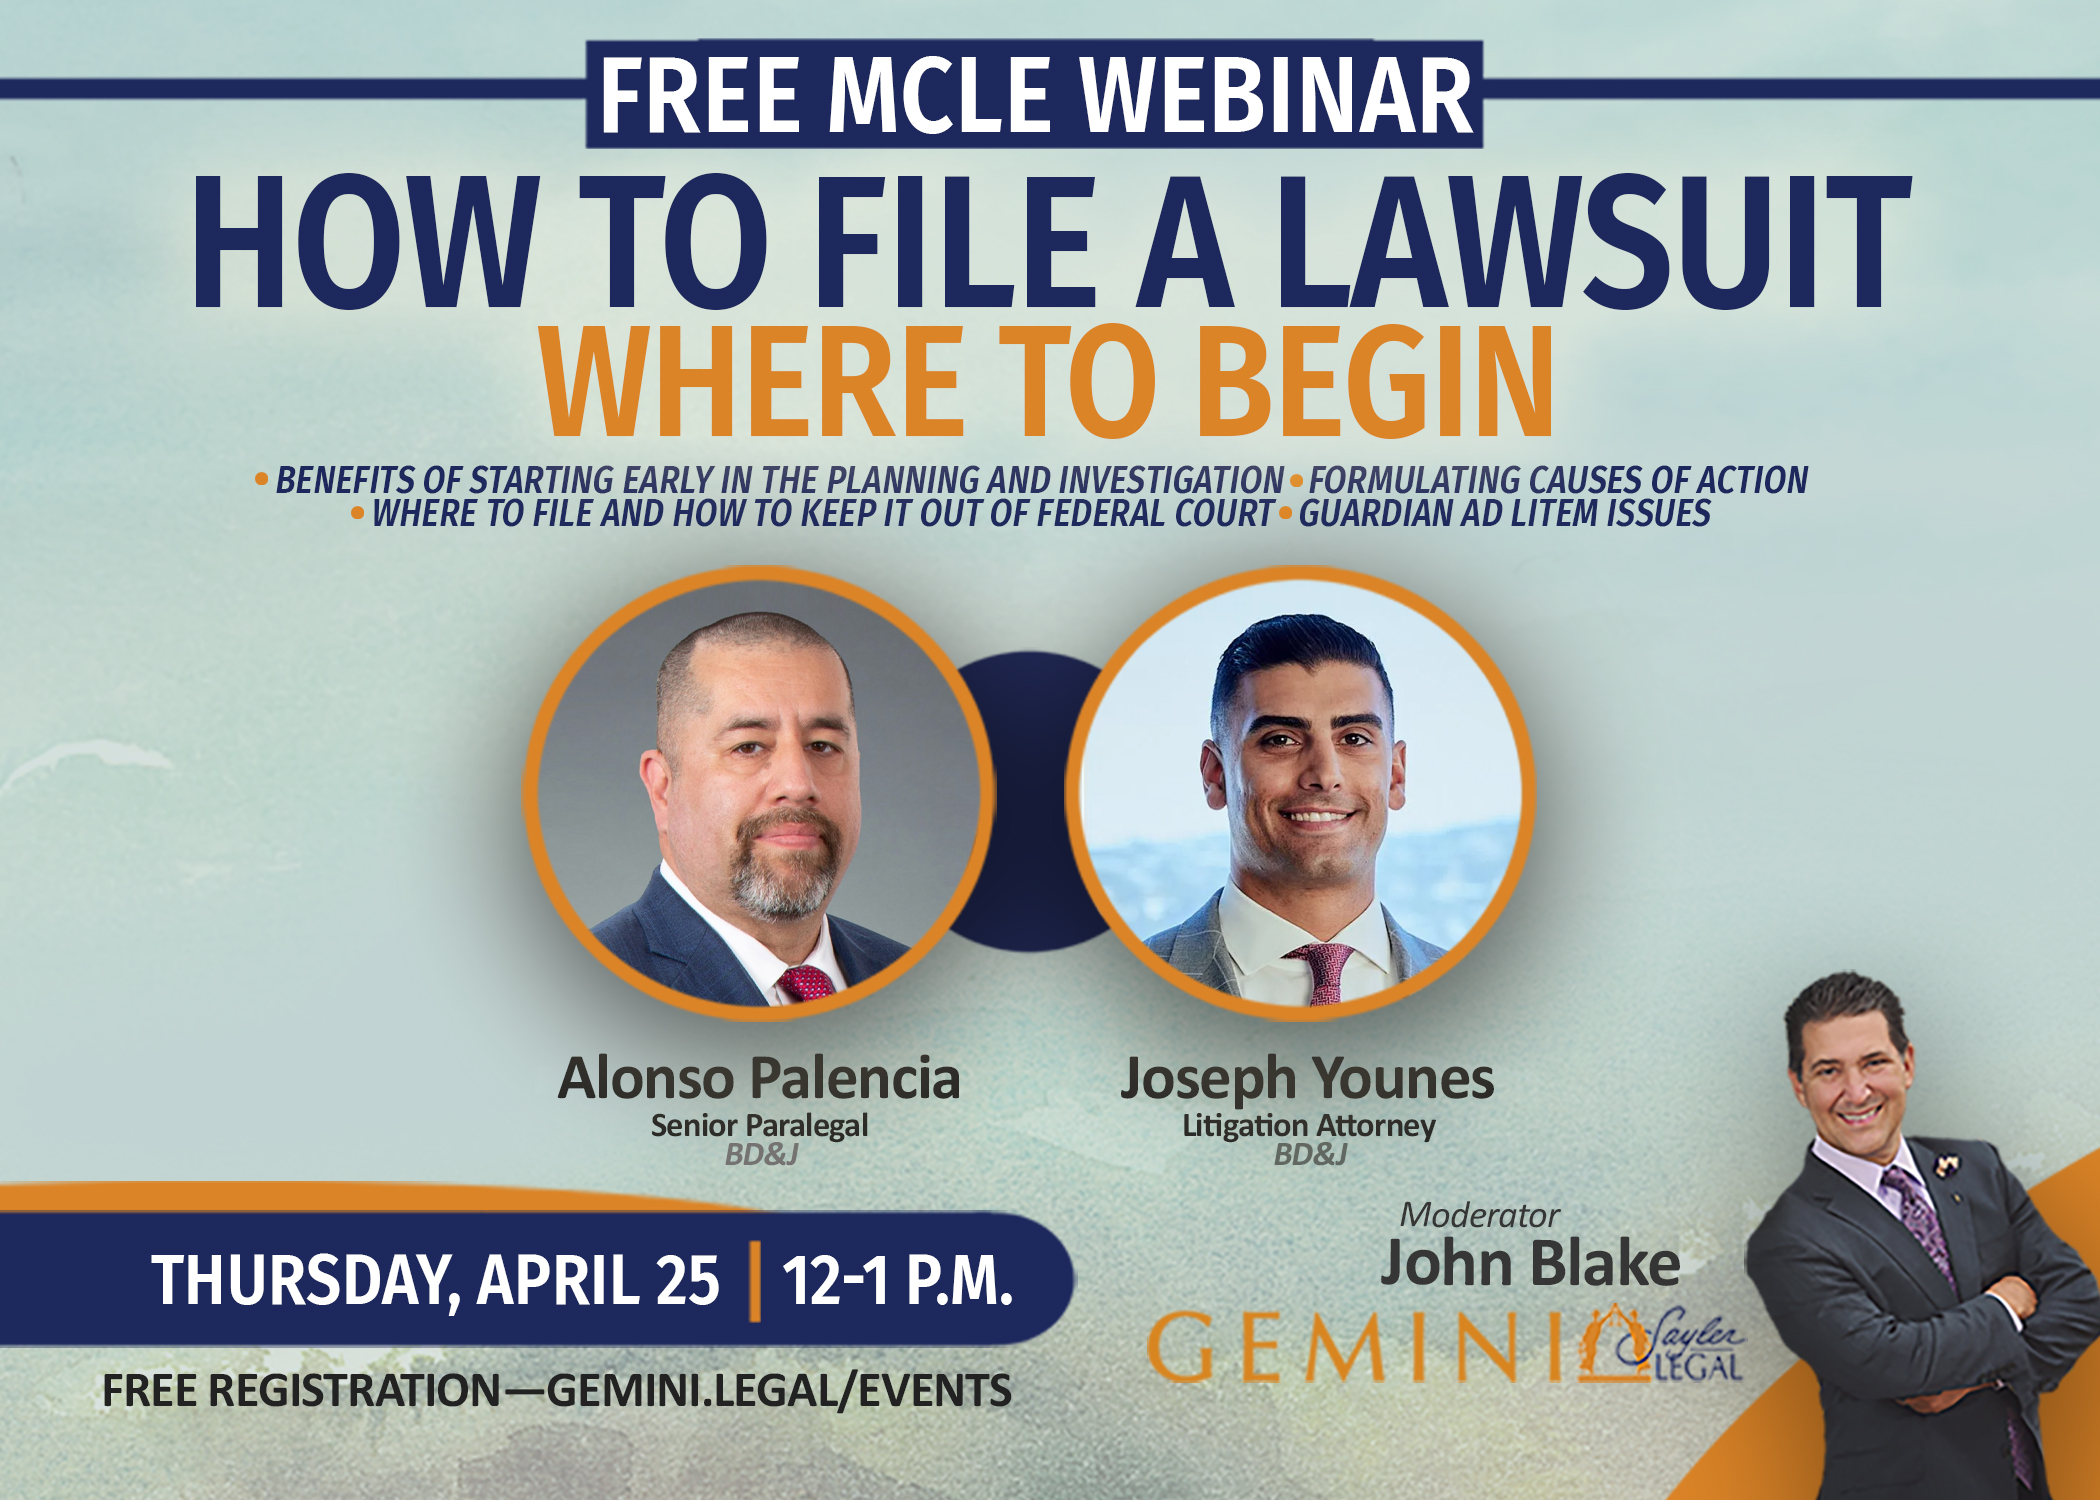 Gemini Legal civil free mcle webinar. How to File a Lawsuit - How to Begin on 4/25/2024 from 12-1 p.m. 